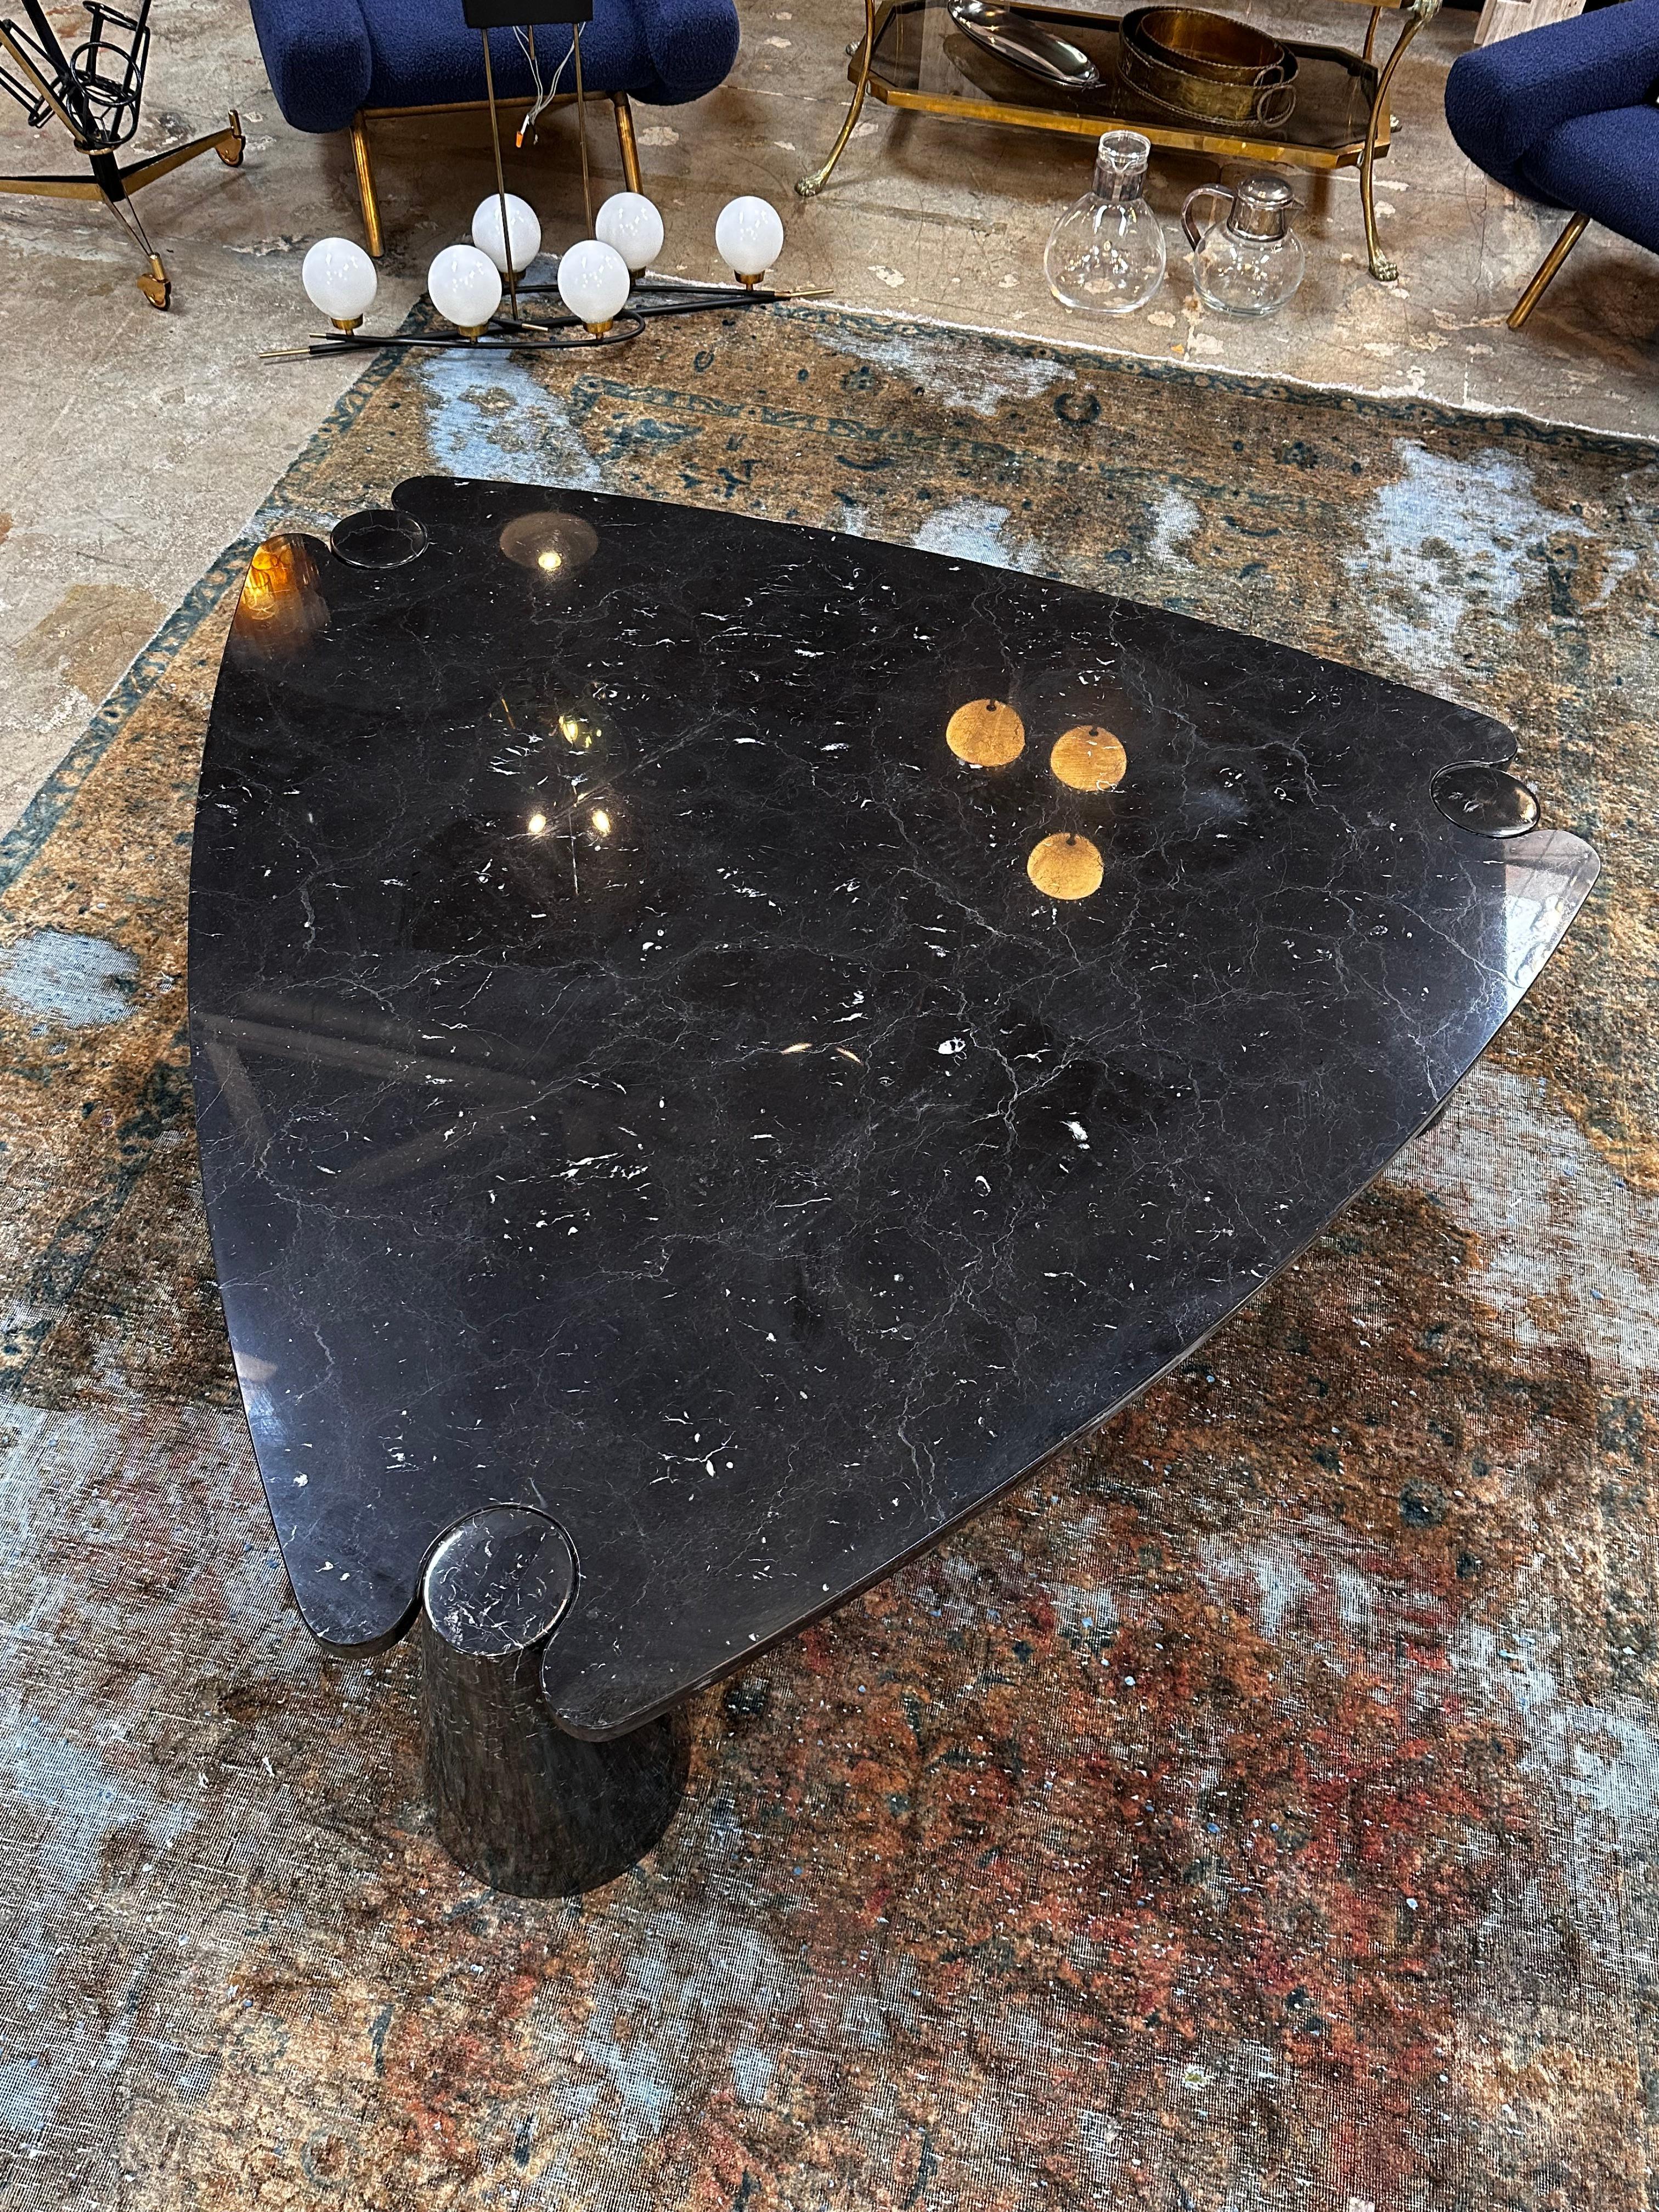 OVERSIZE “Eros” series coffee table designed by Angelo Mangiarotti, made of Black Marquina marble, Italy 1970s.

Angelo Mangiarotti (1921-2012) was an Italian architect and Industrial designer with a reputation to mainly focus on the needs of the